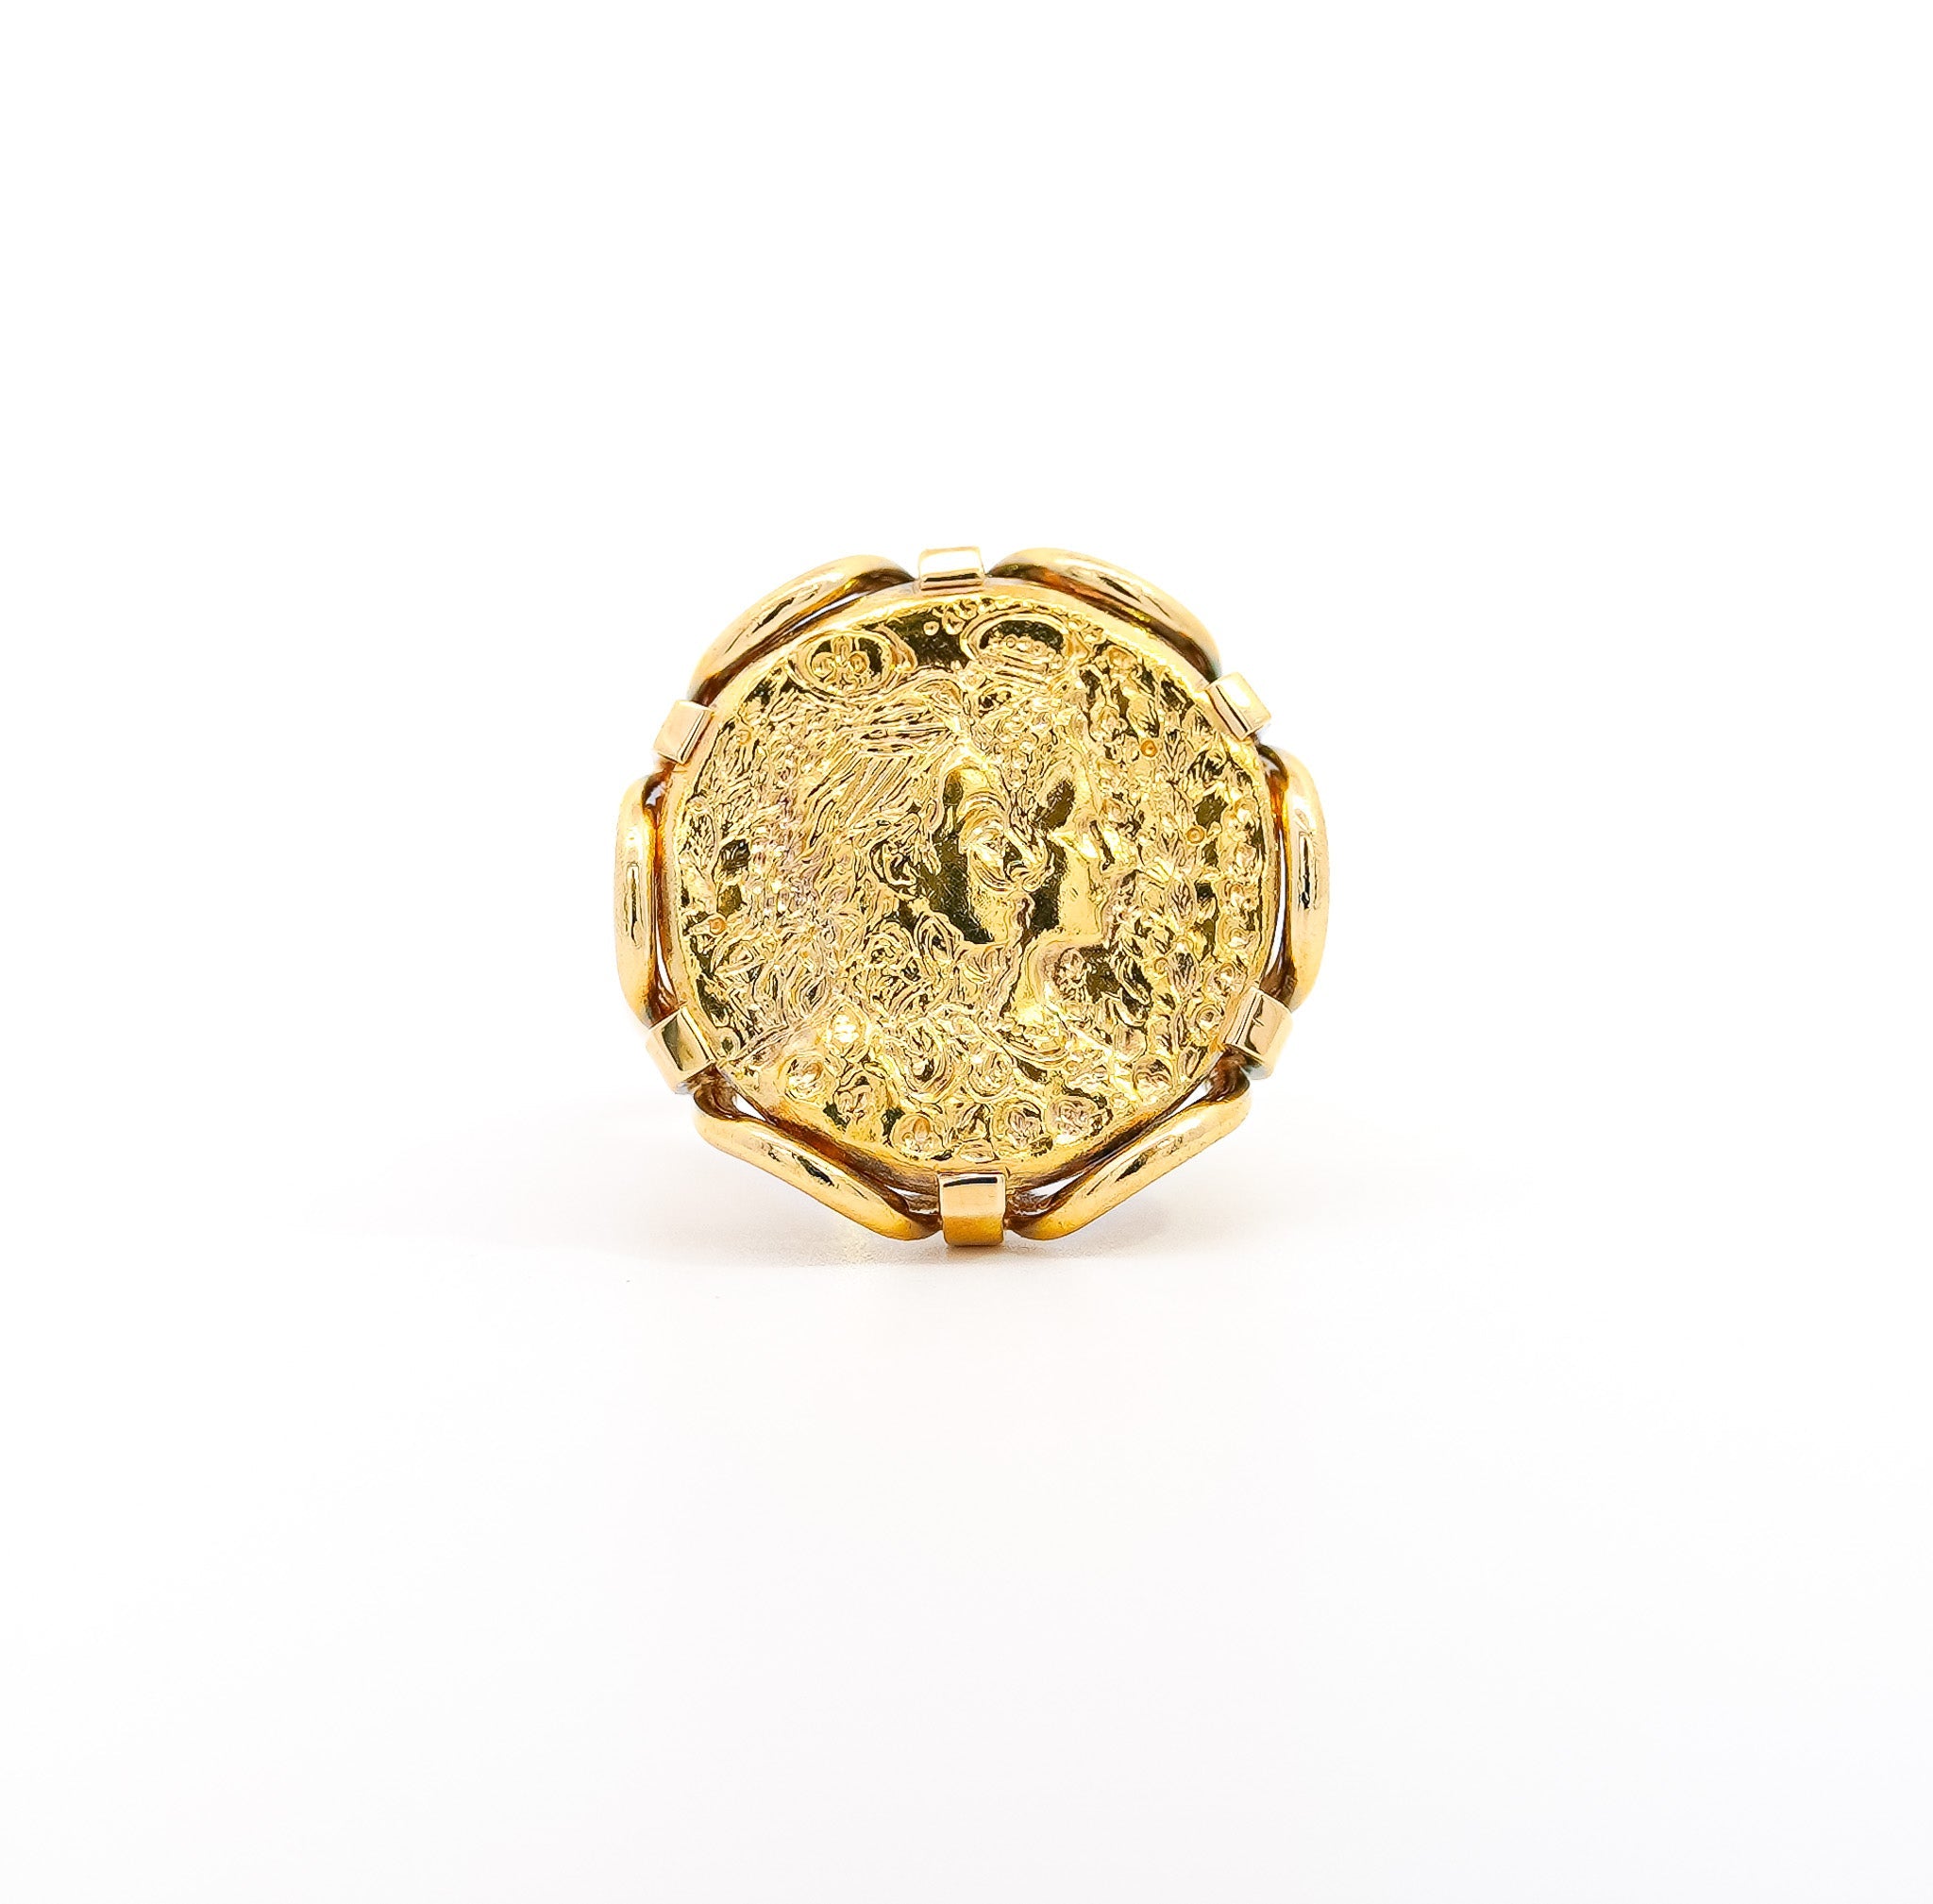 Salvador Dali For Piaget 'Dalí d'Or' 22K Gold Coin Ring in 18K Gold Setting | Retailed by Van Cleef & Arpels at Bergdorf Goodman Paris Jewels Boutique